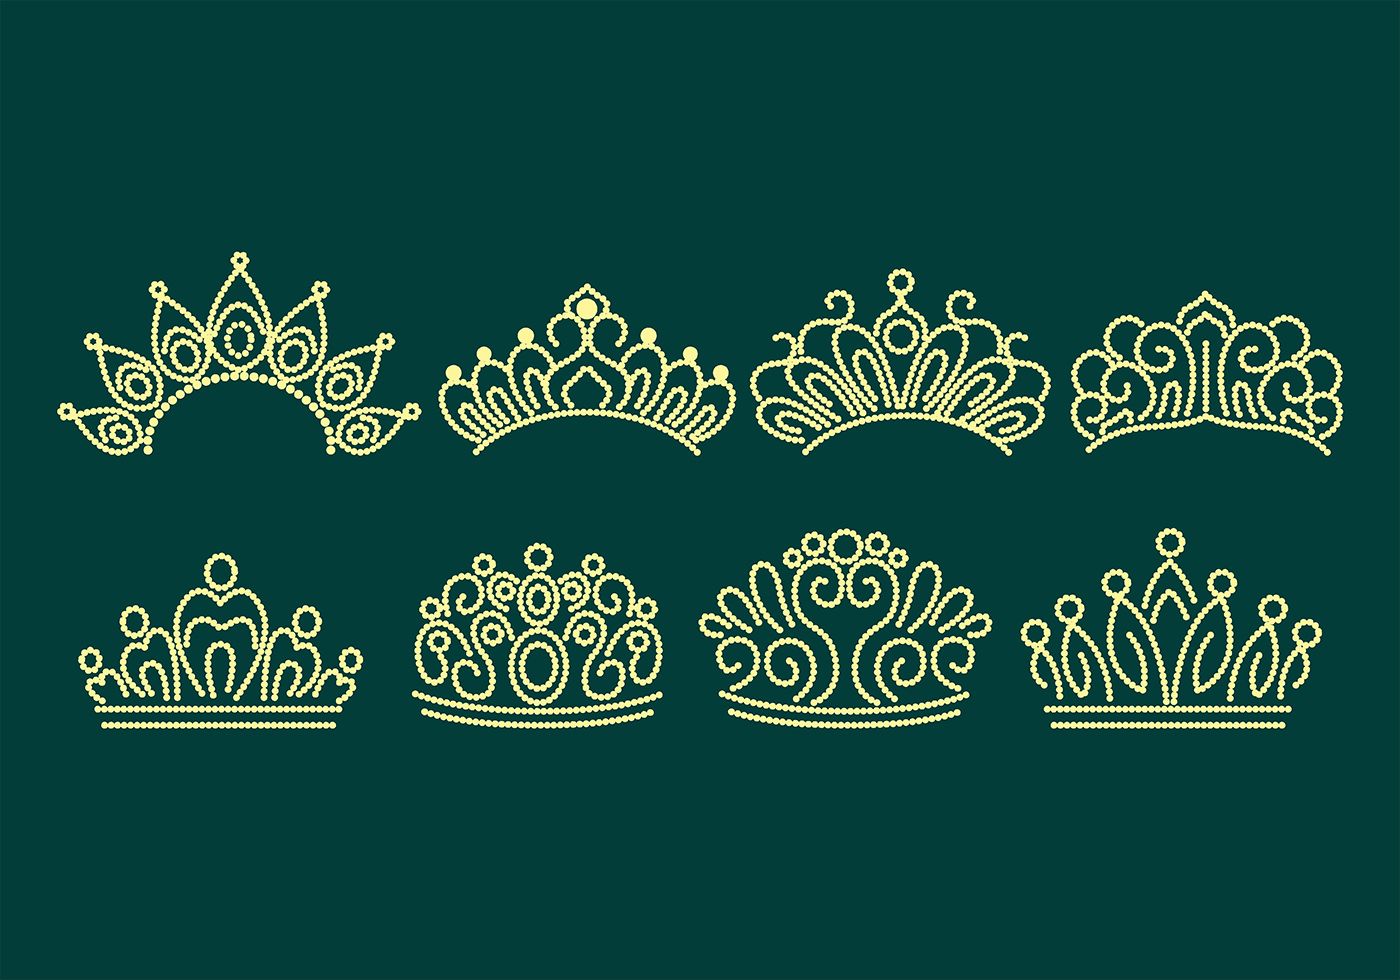 Download Pageant Crown Icons - Download Free Vectors, Clipart ...